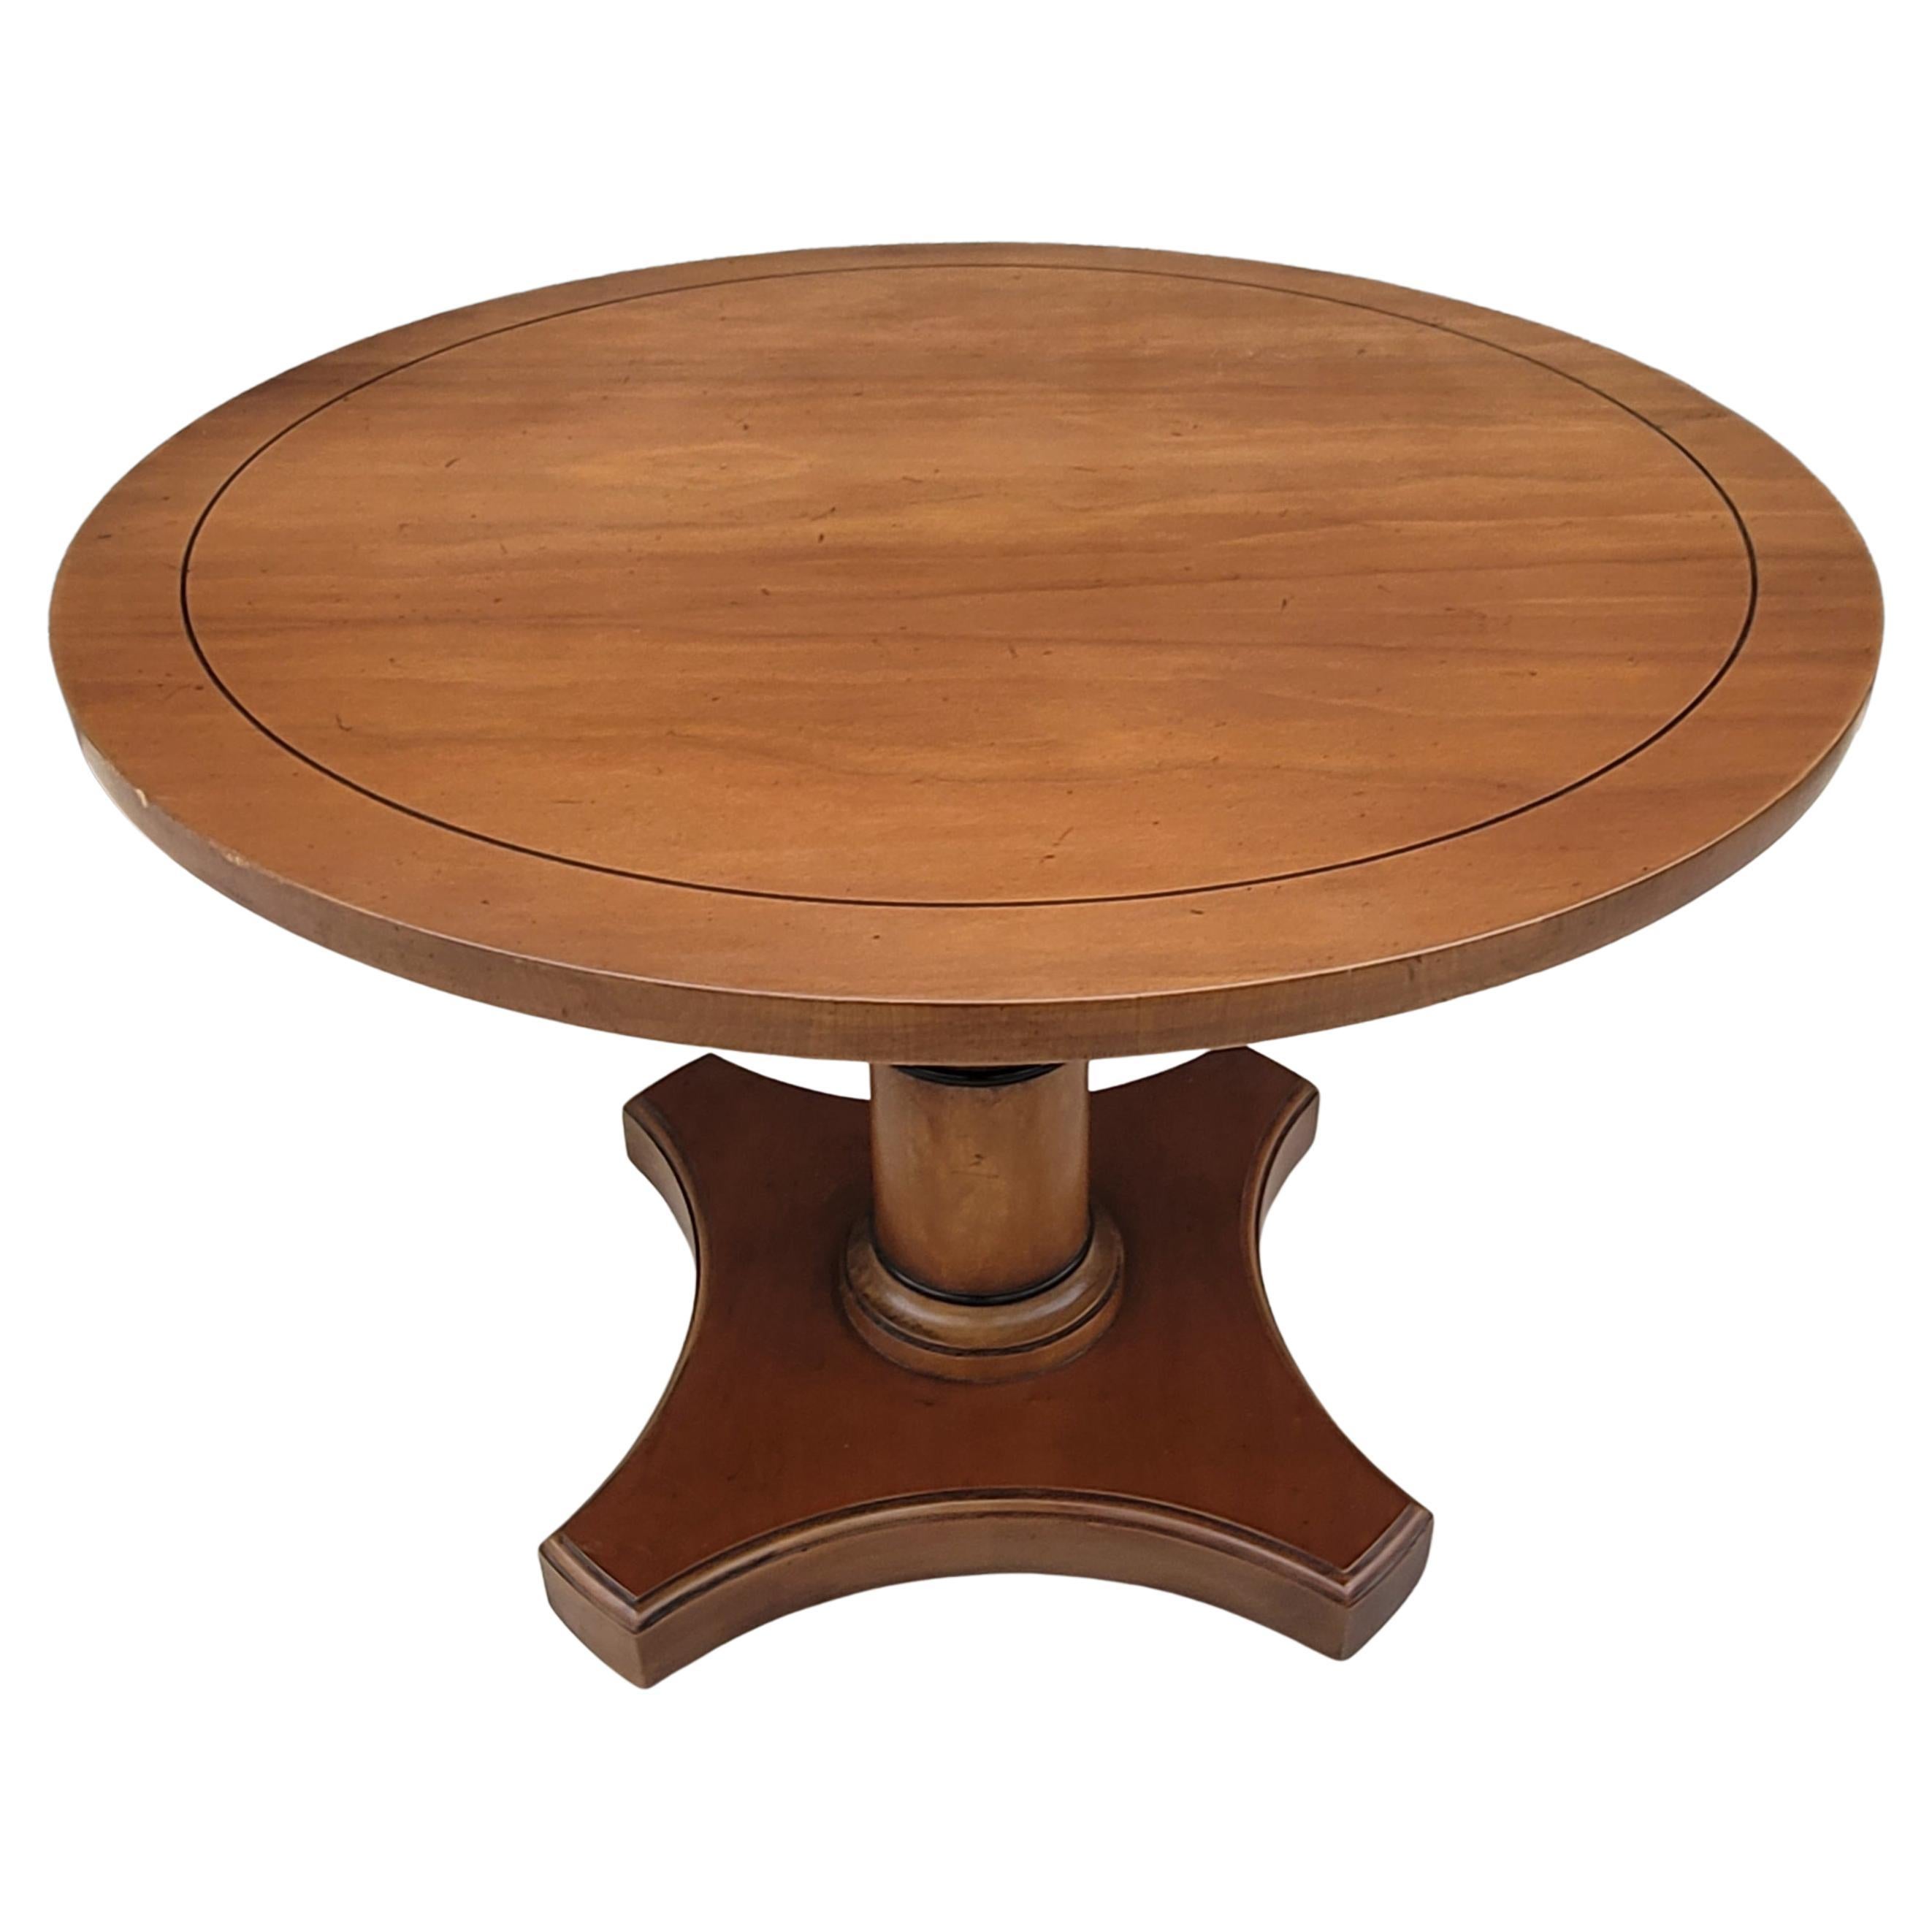 Swedish Modern Art Deco Style Fruitwood Round Pedestal End or Side Table